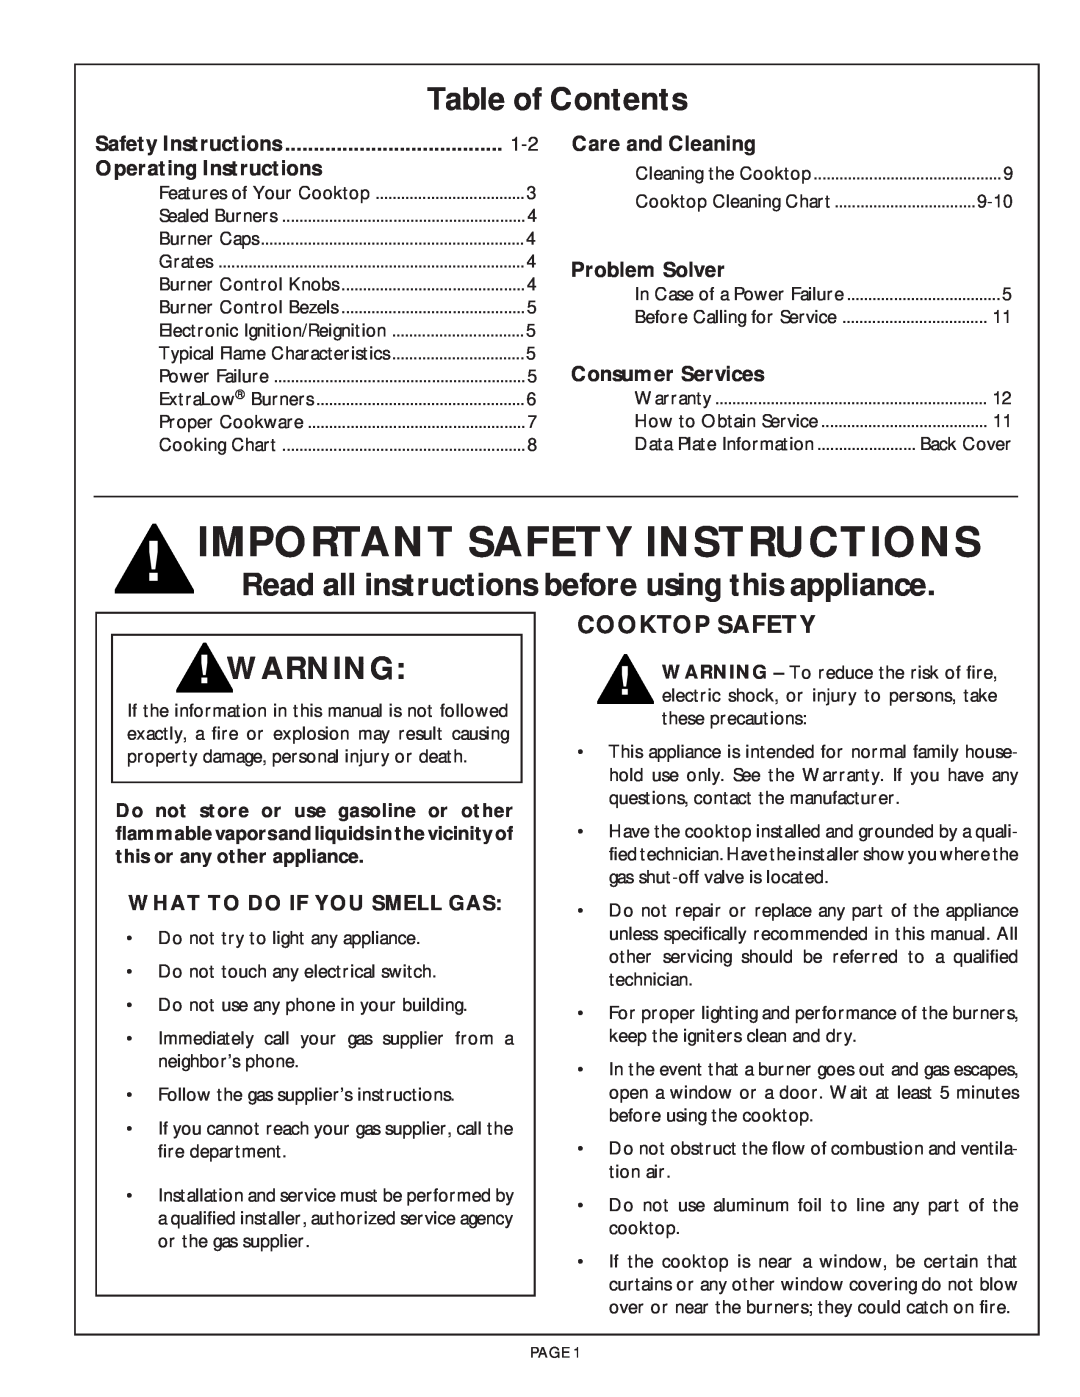 Thermador SGC456 Important Safety Instructions, Table of Contents, Read all instructions before using this appliance 